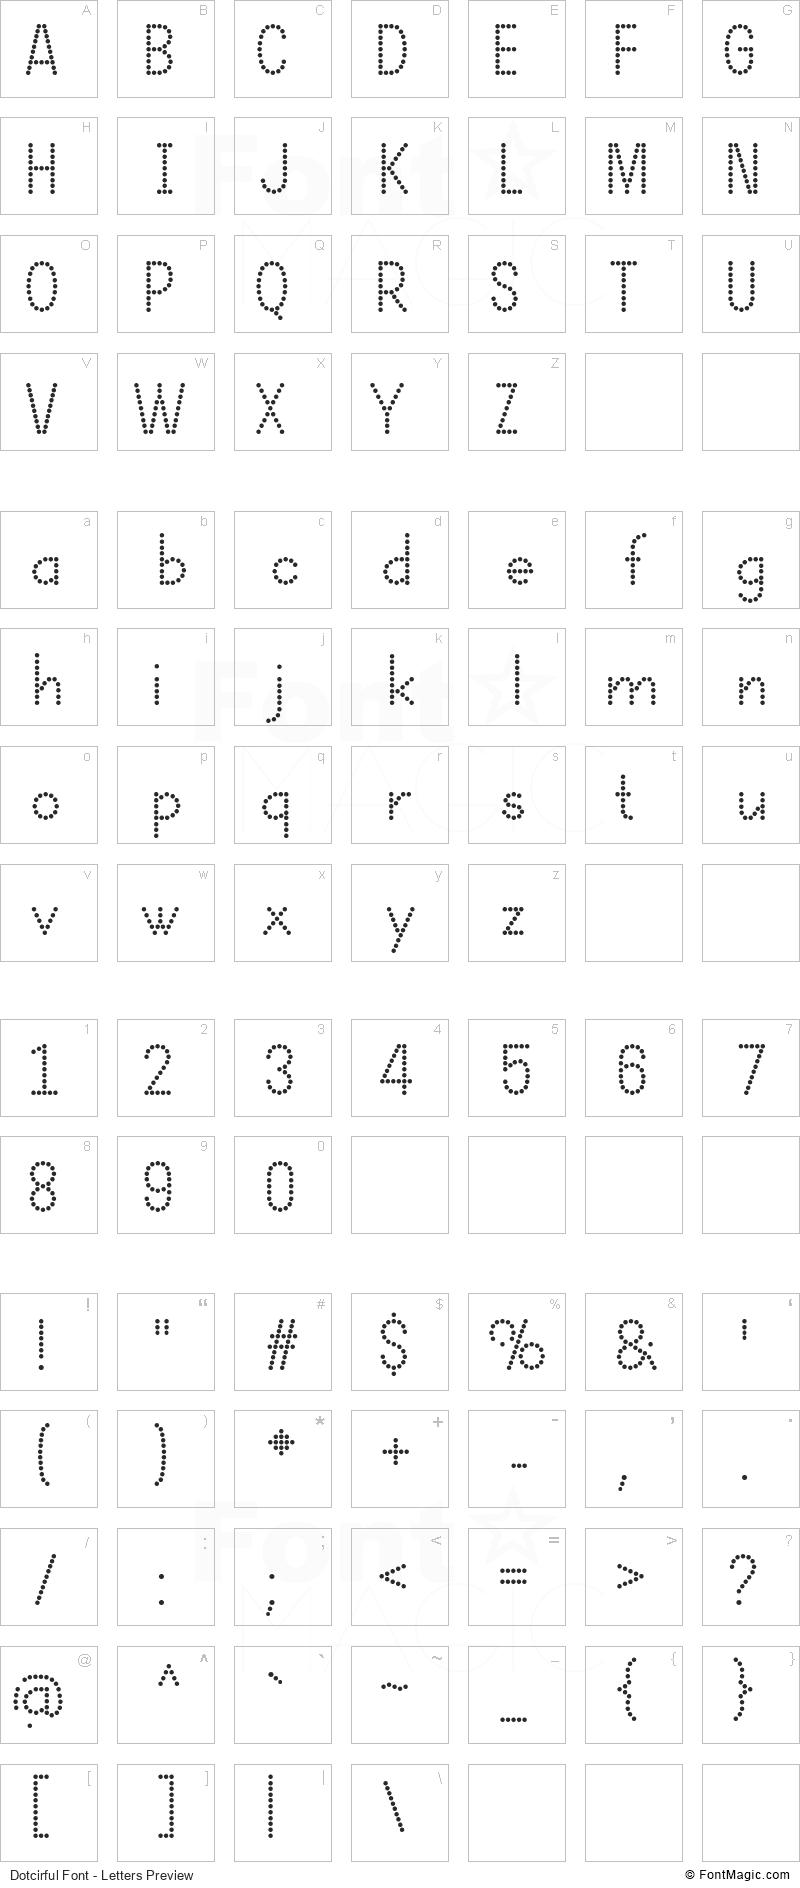 Dotcirful Font - All Latters Preview Chart